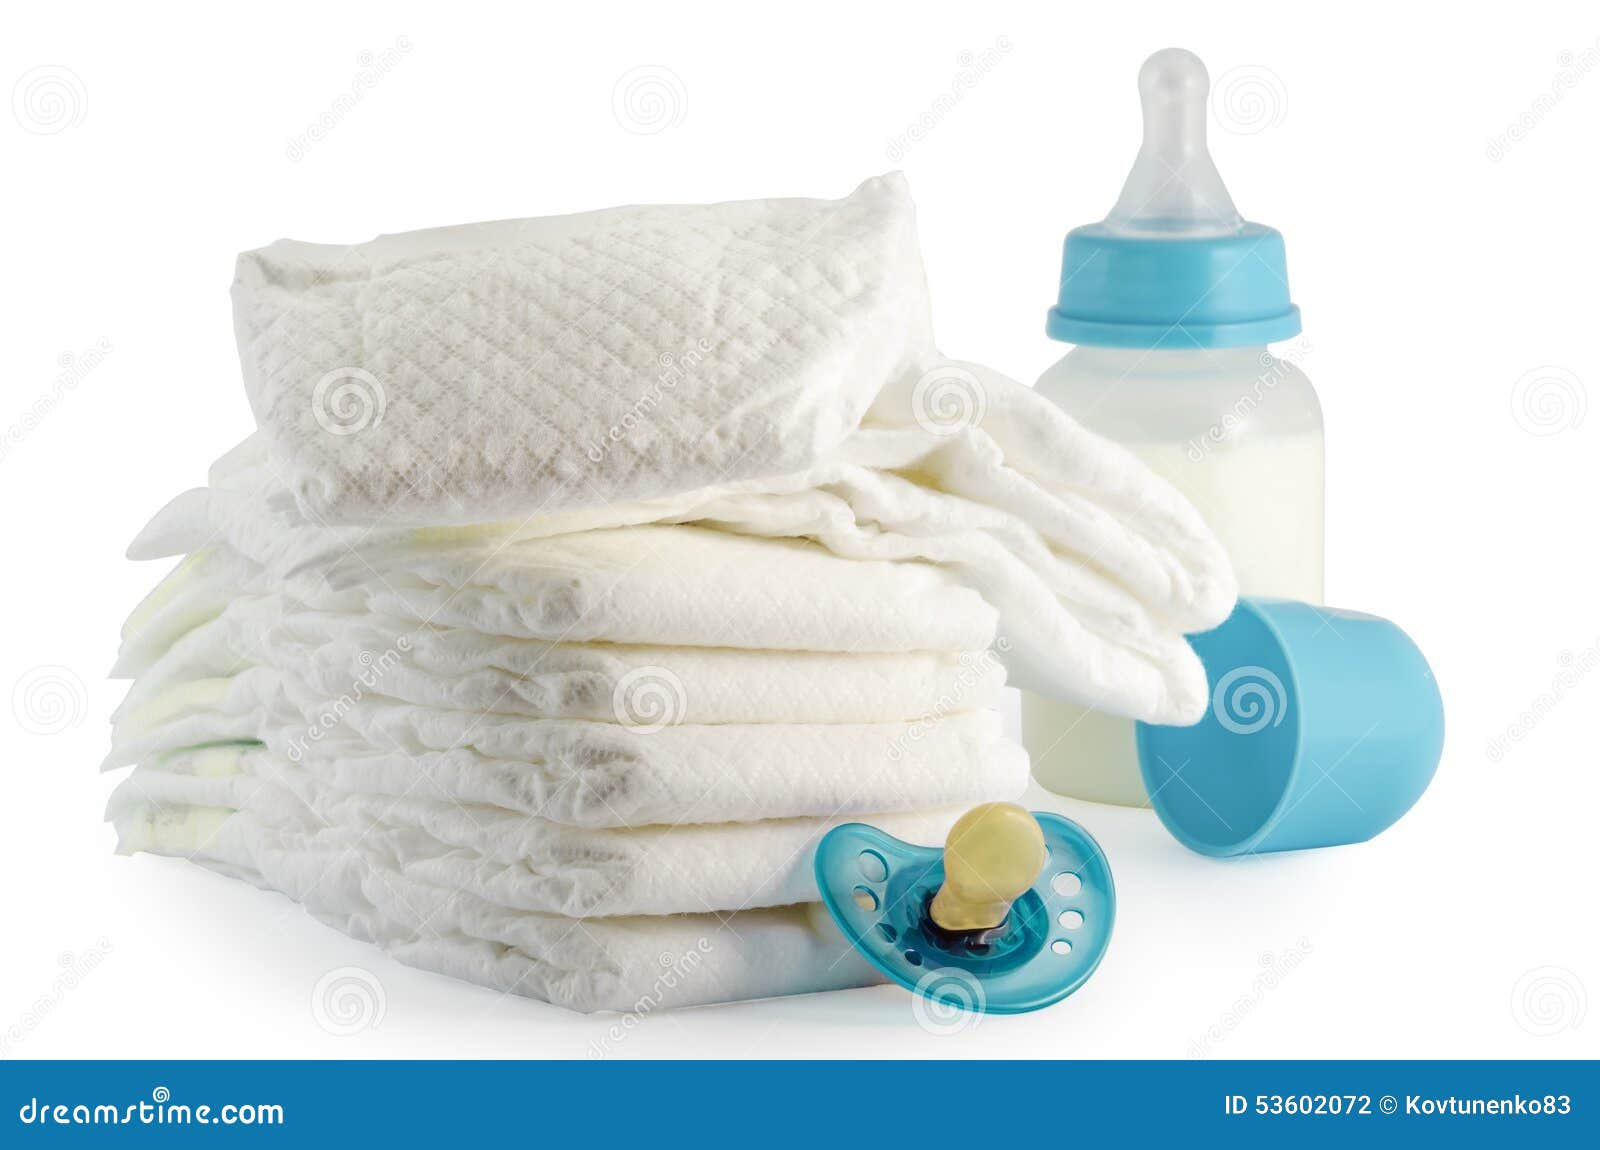 Children s products stock photo. Image of healthcare - 53602072